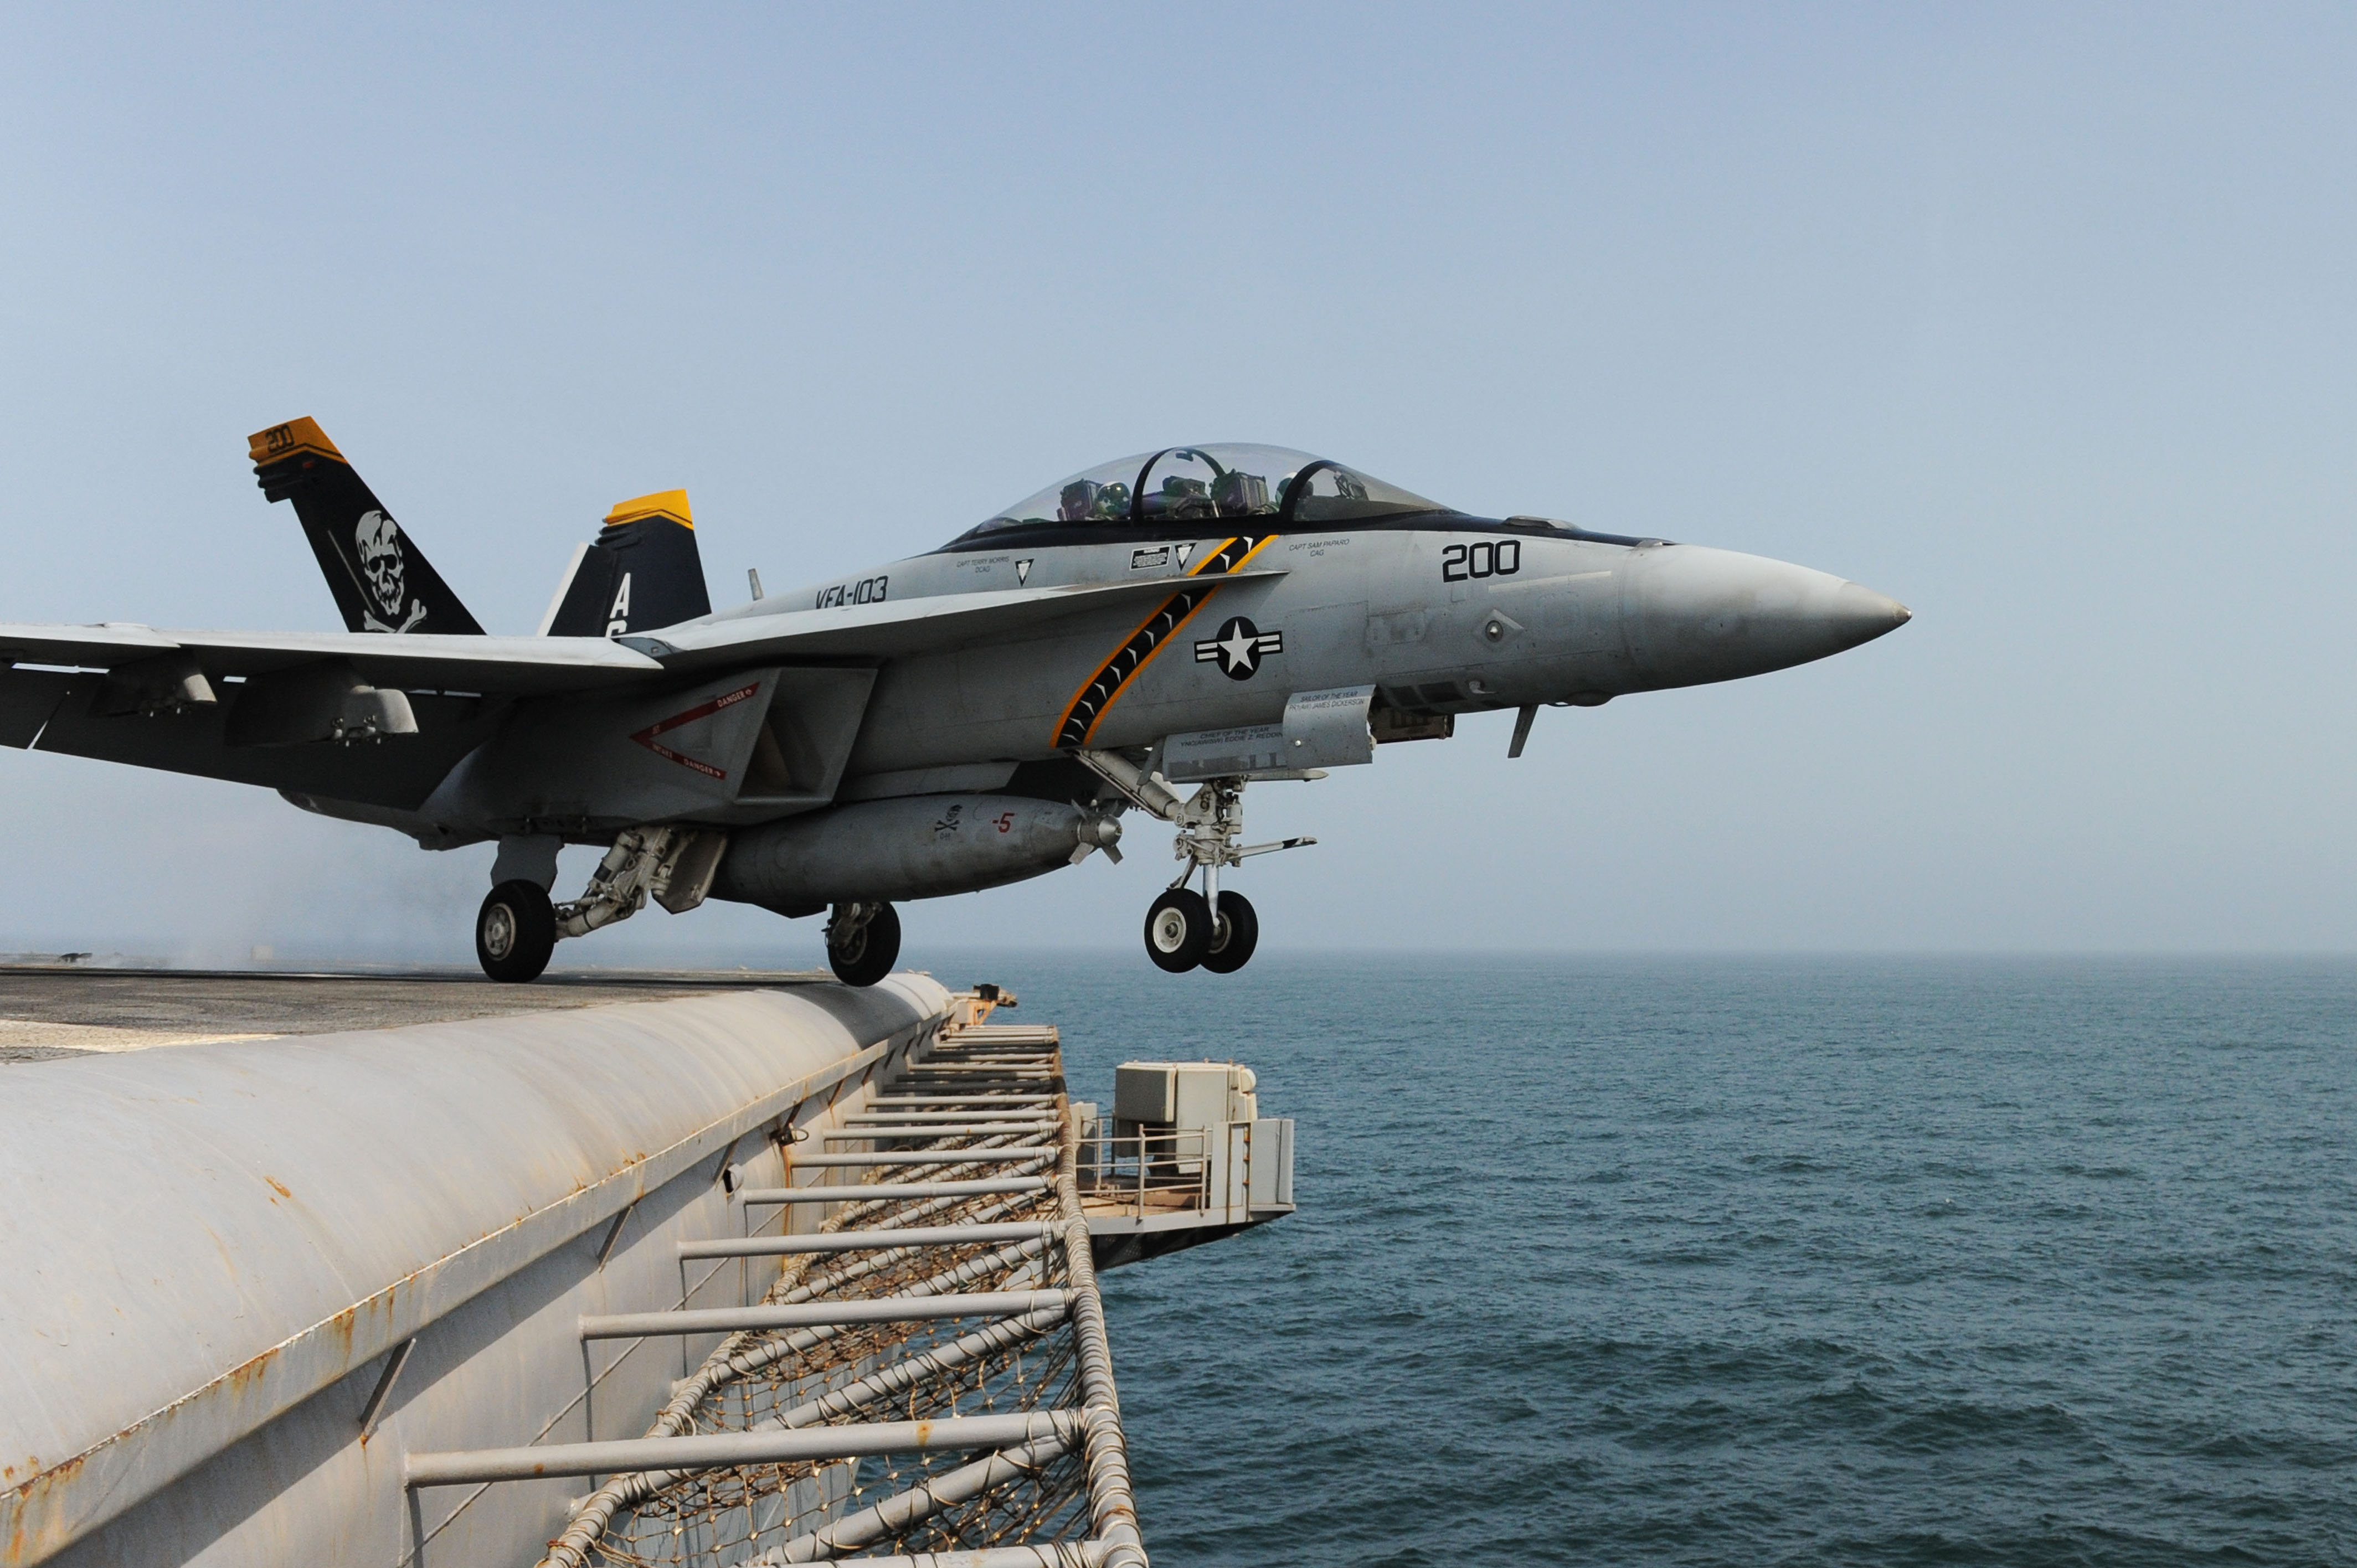 File:Flickr - Official U.S. Navy Imagery - A jet launches from the ...